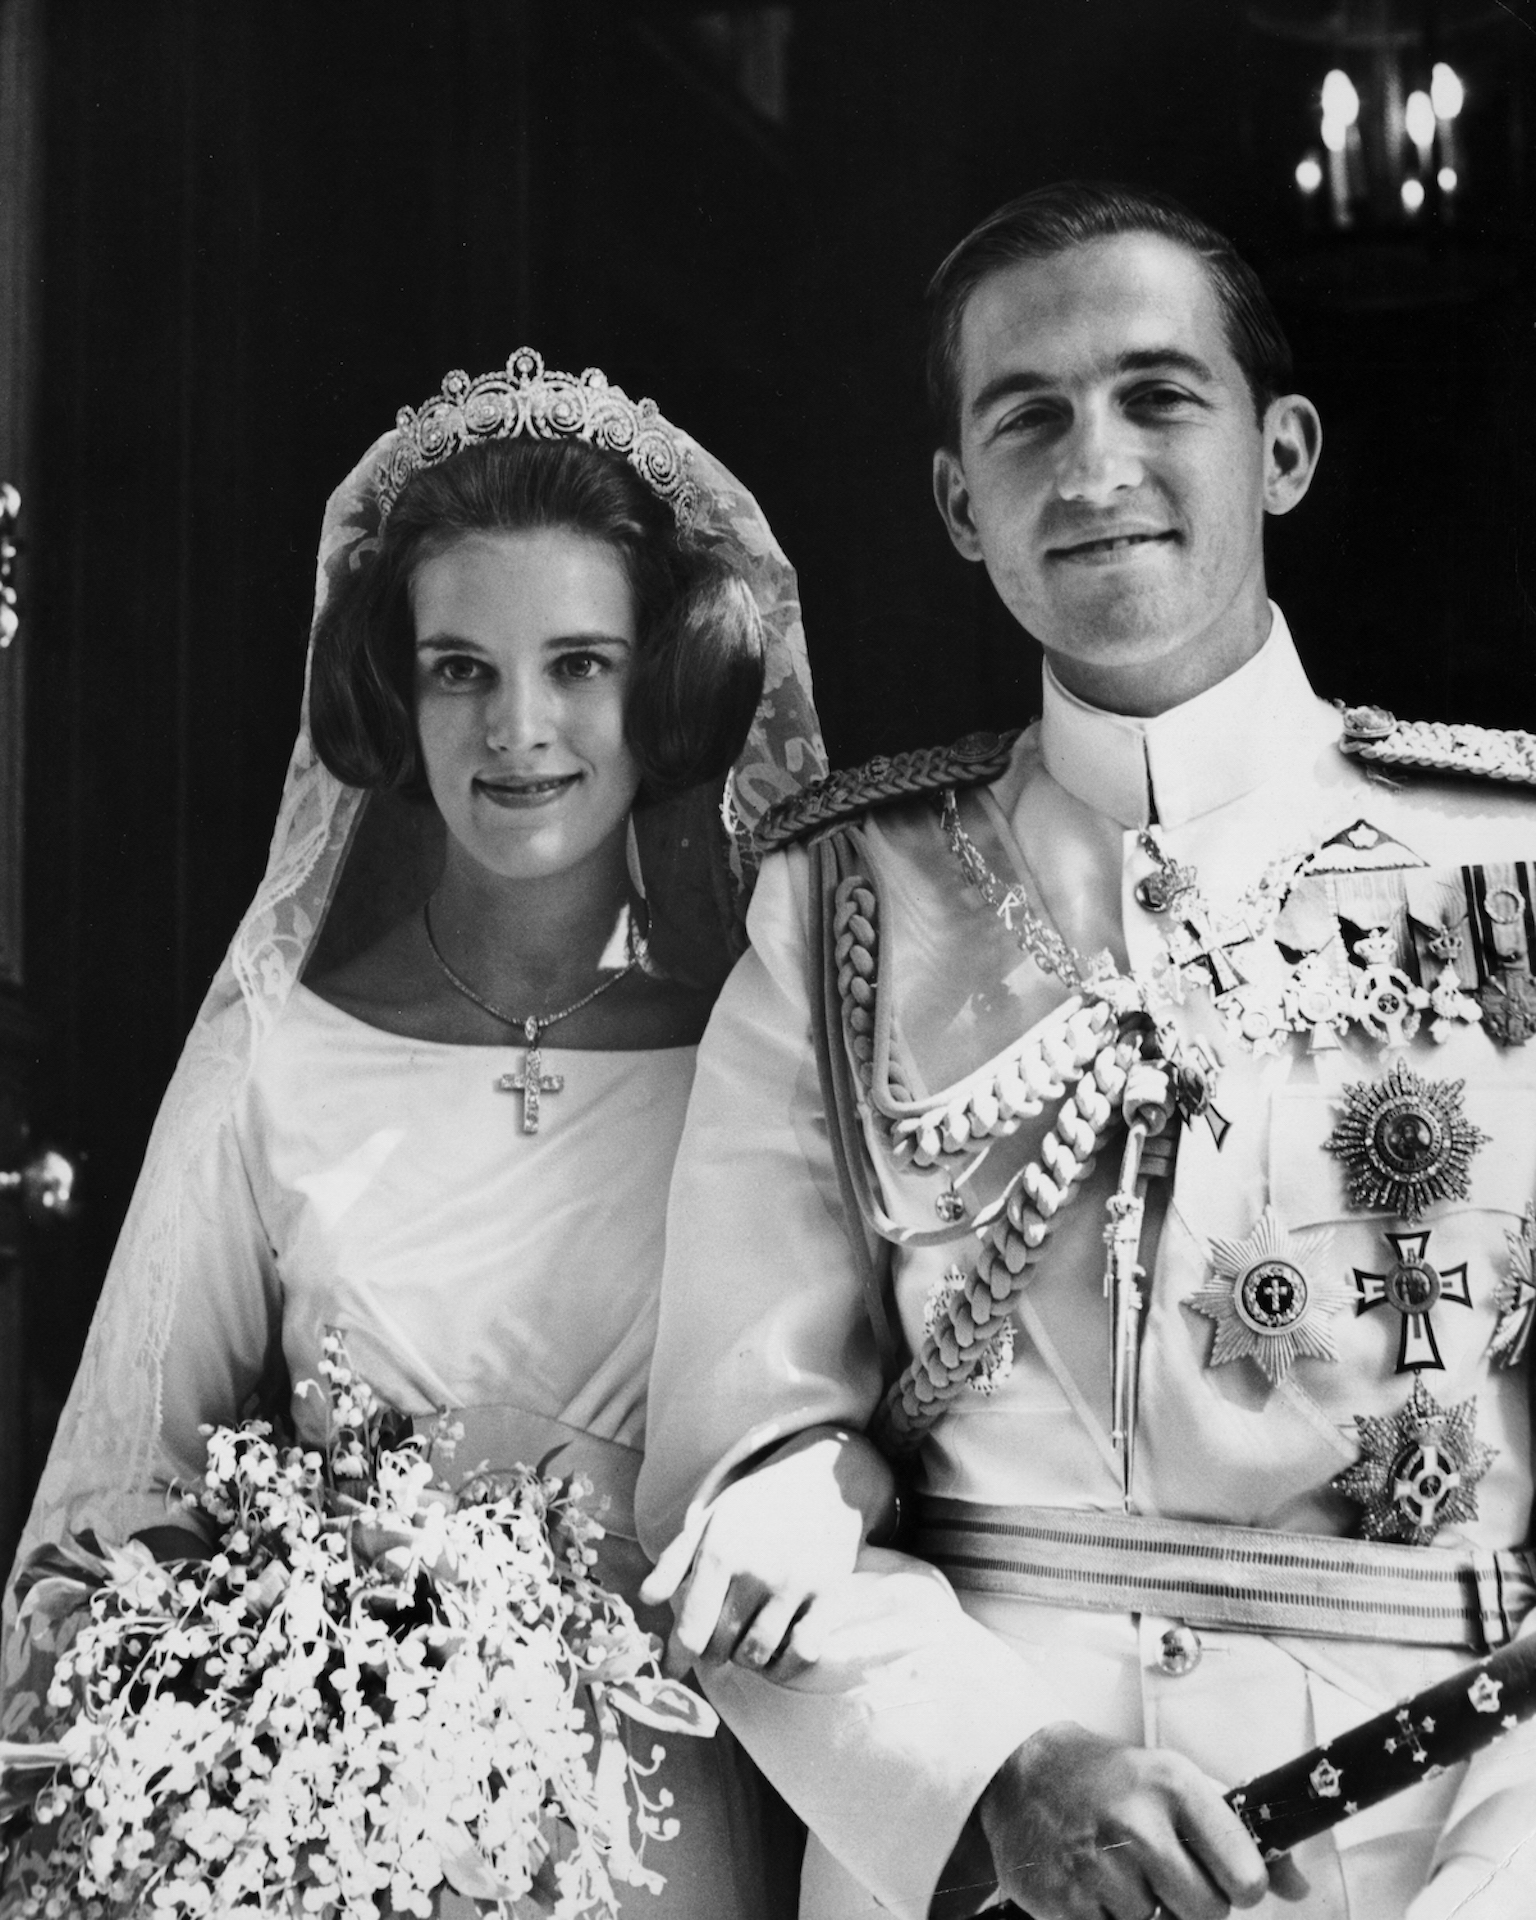 King Constantine II of Greece and Queen Anne Marie Wearing The Khedive of Egypt Tiara on Their Wedding Day